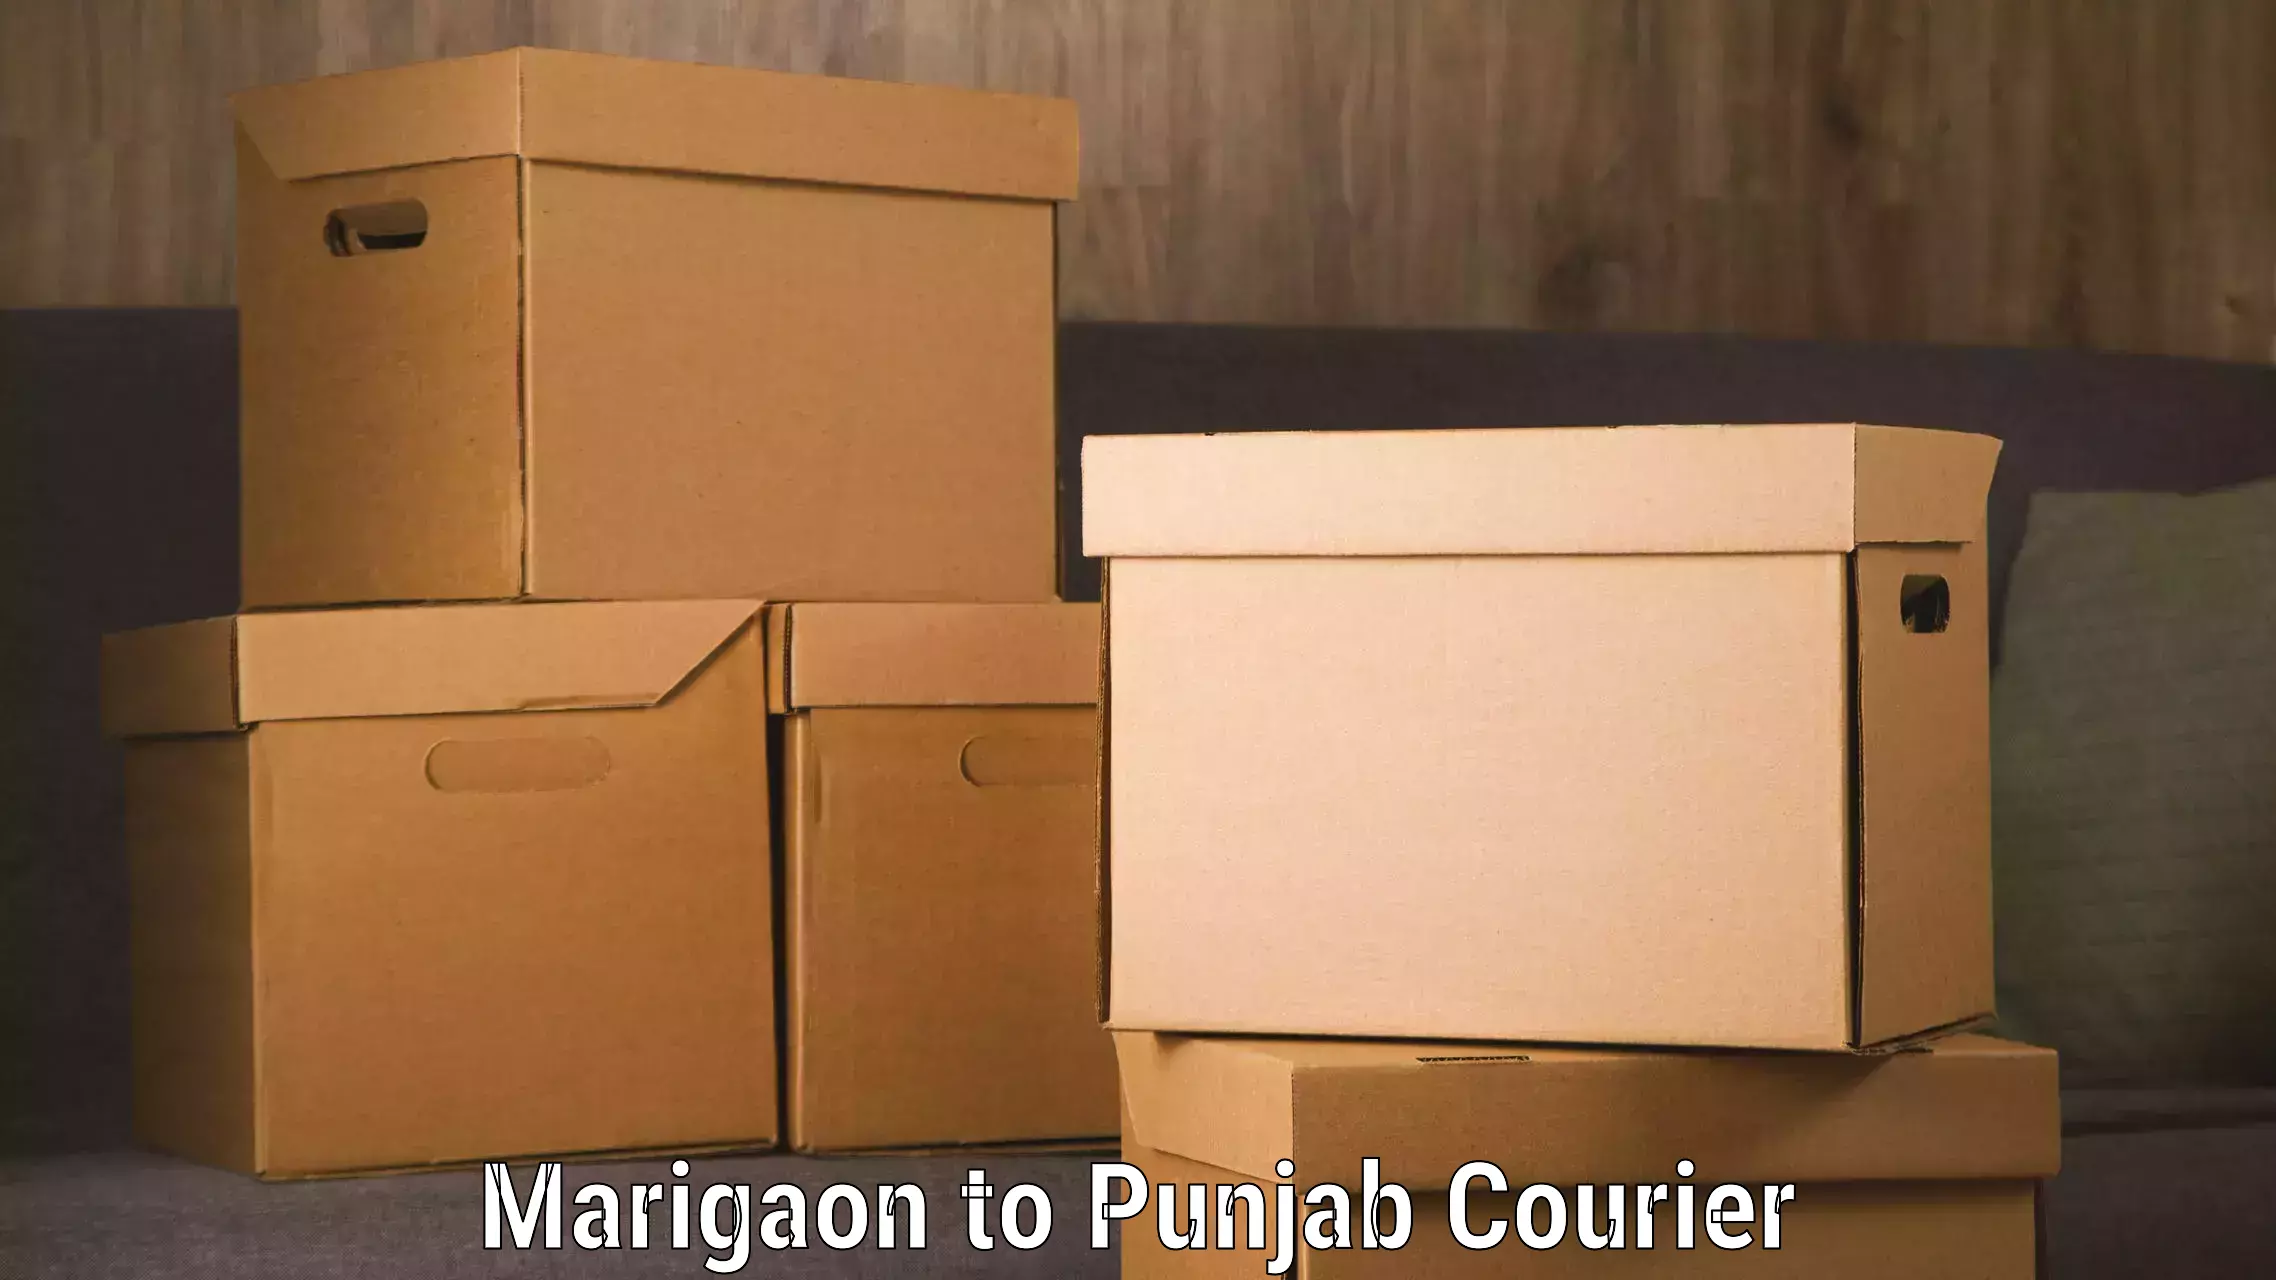 Luggage delivery network Marigaon to Punjab